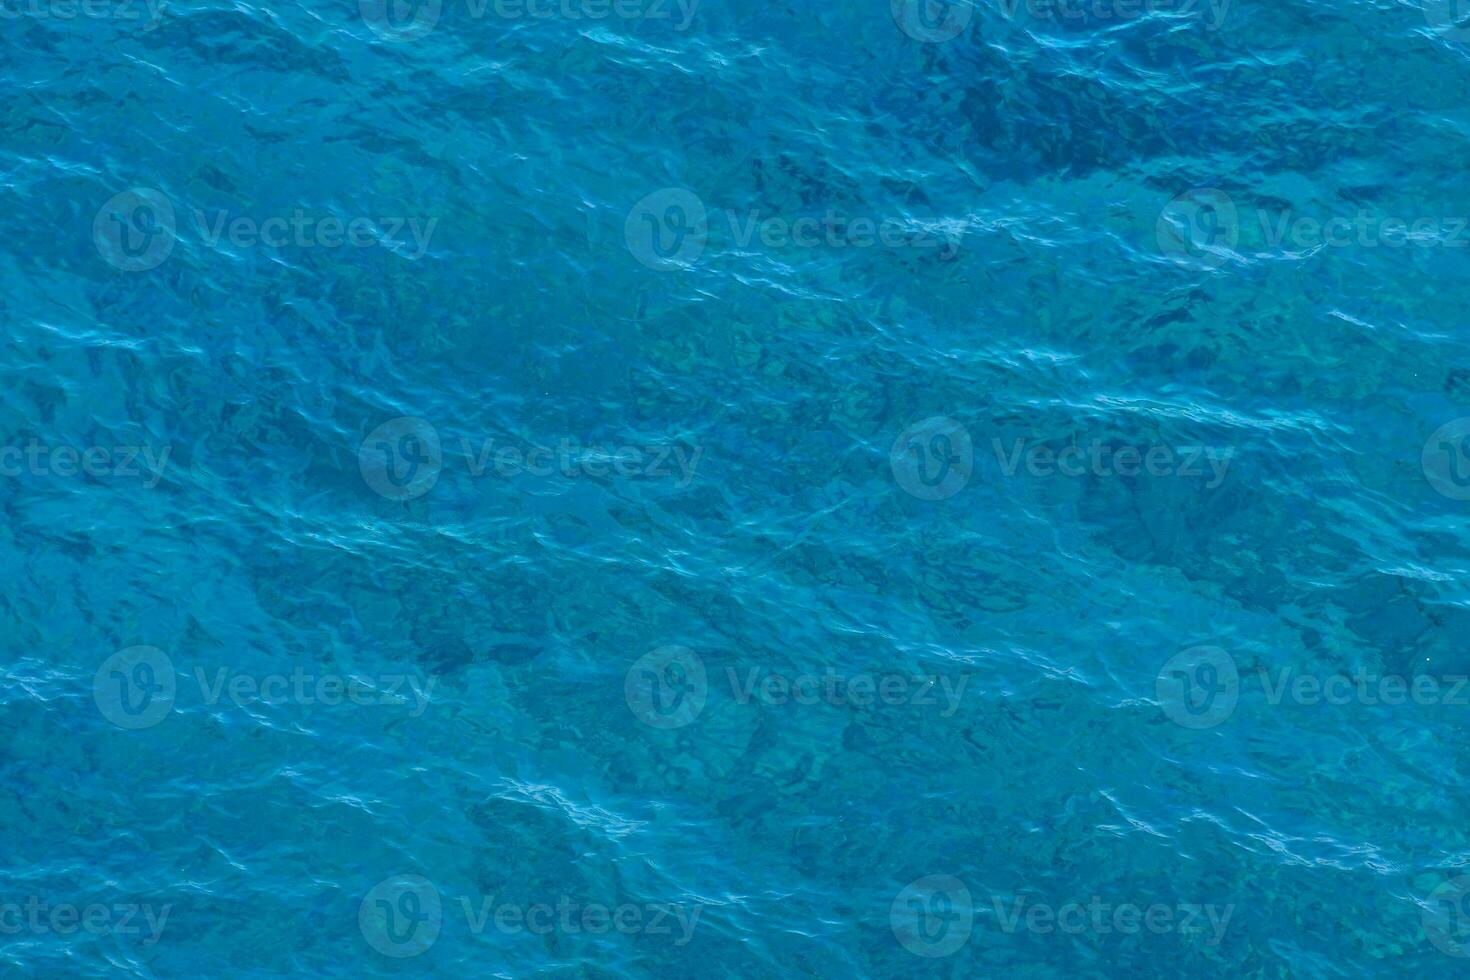 Sea with small ripples photo